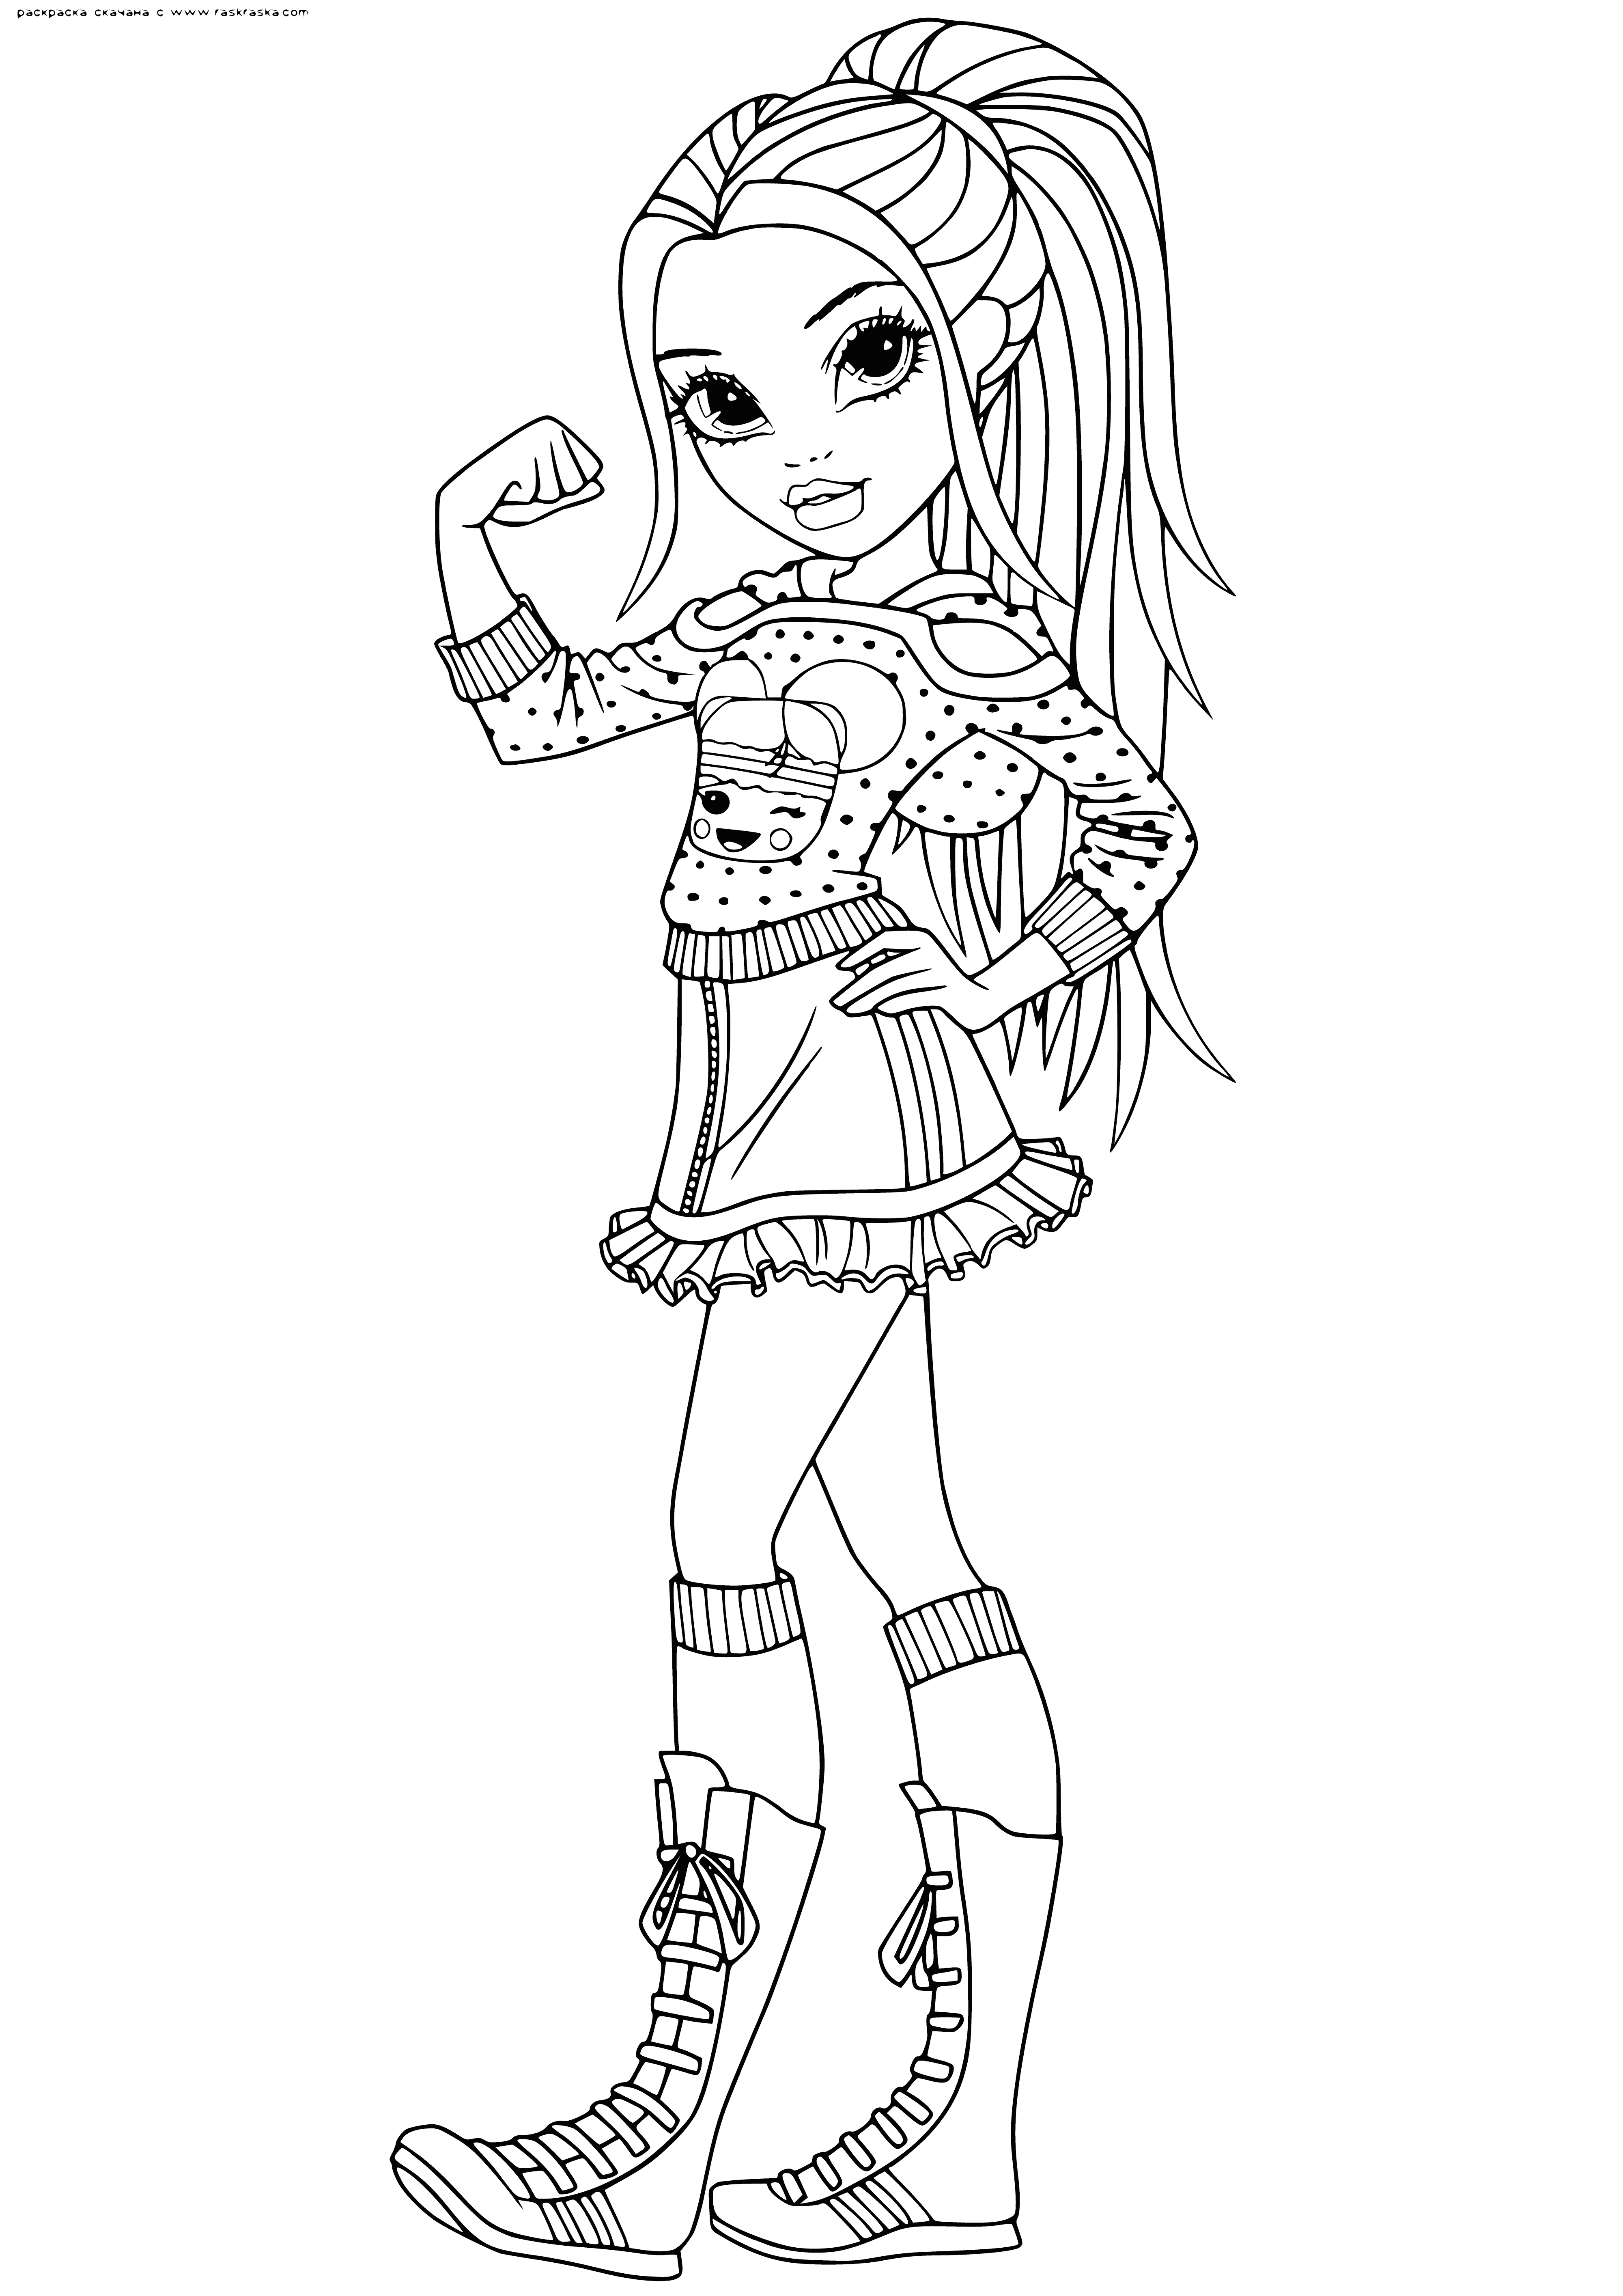 coloring page: Avery is the joyful face of the company, always up for a good time & trendsetting with friends. She loves to dance & be the life of the party.